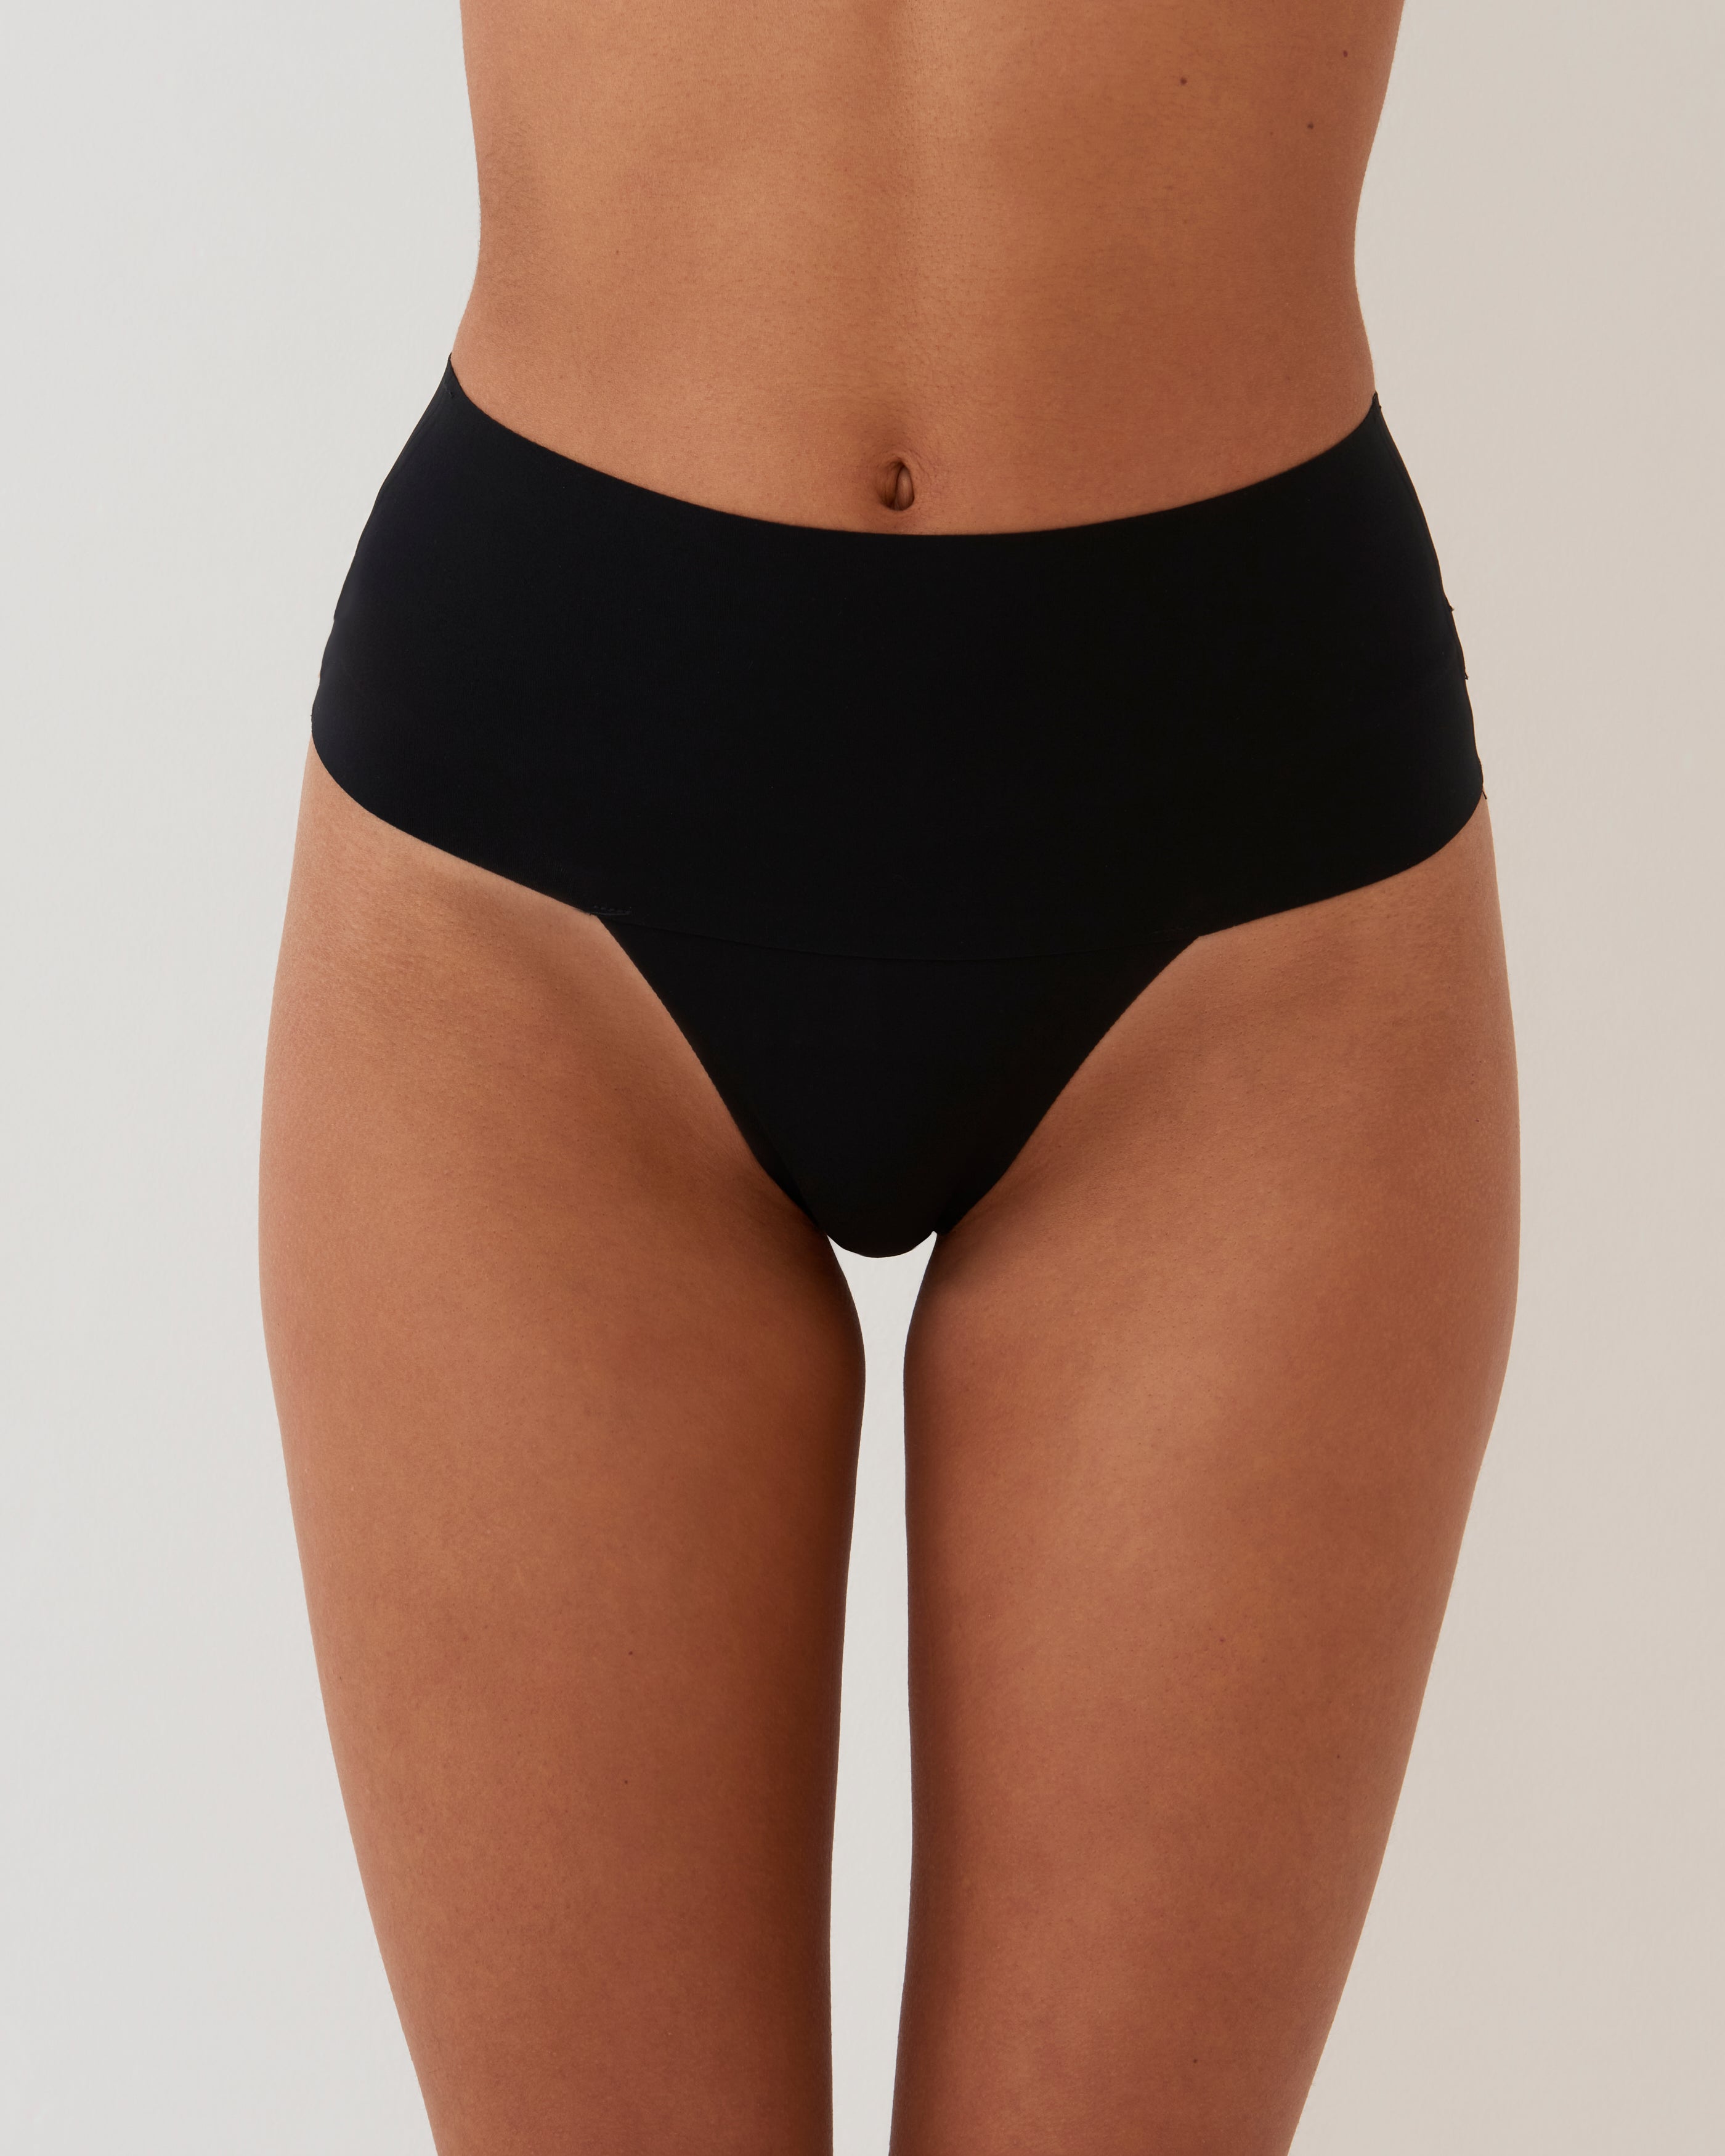 Black High Waisted G-String Invisible